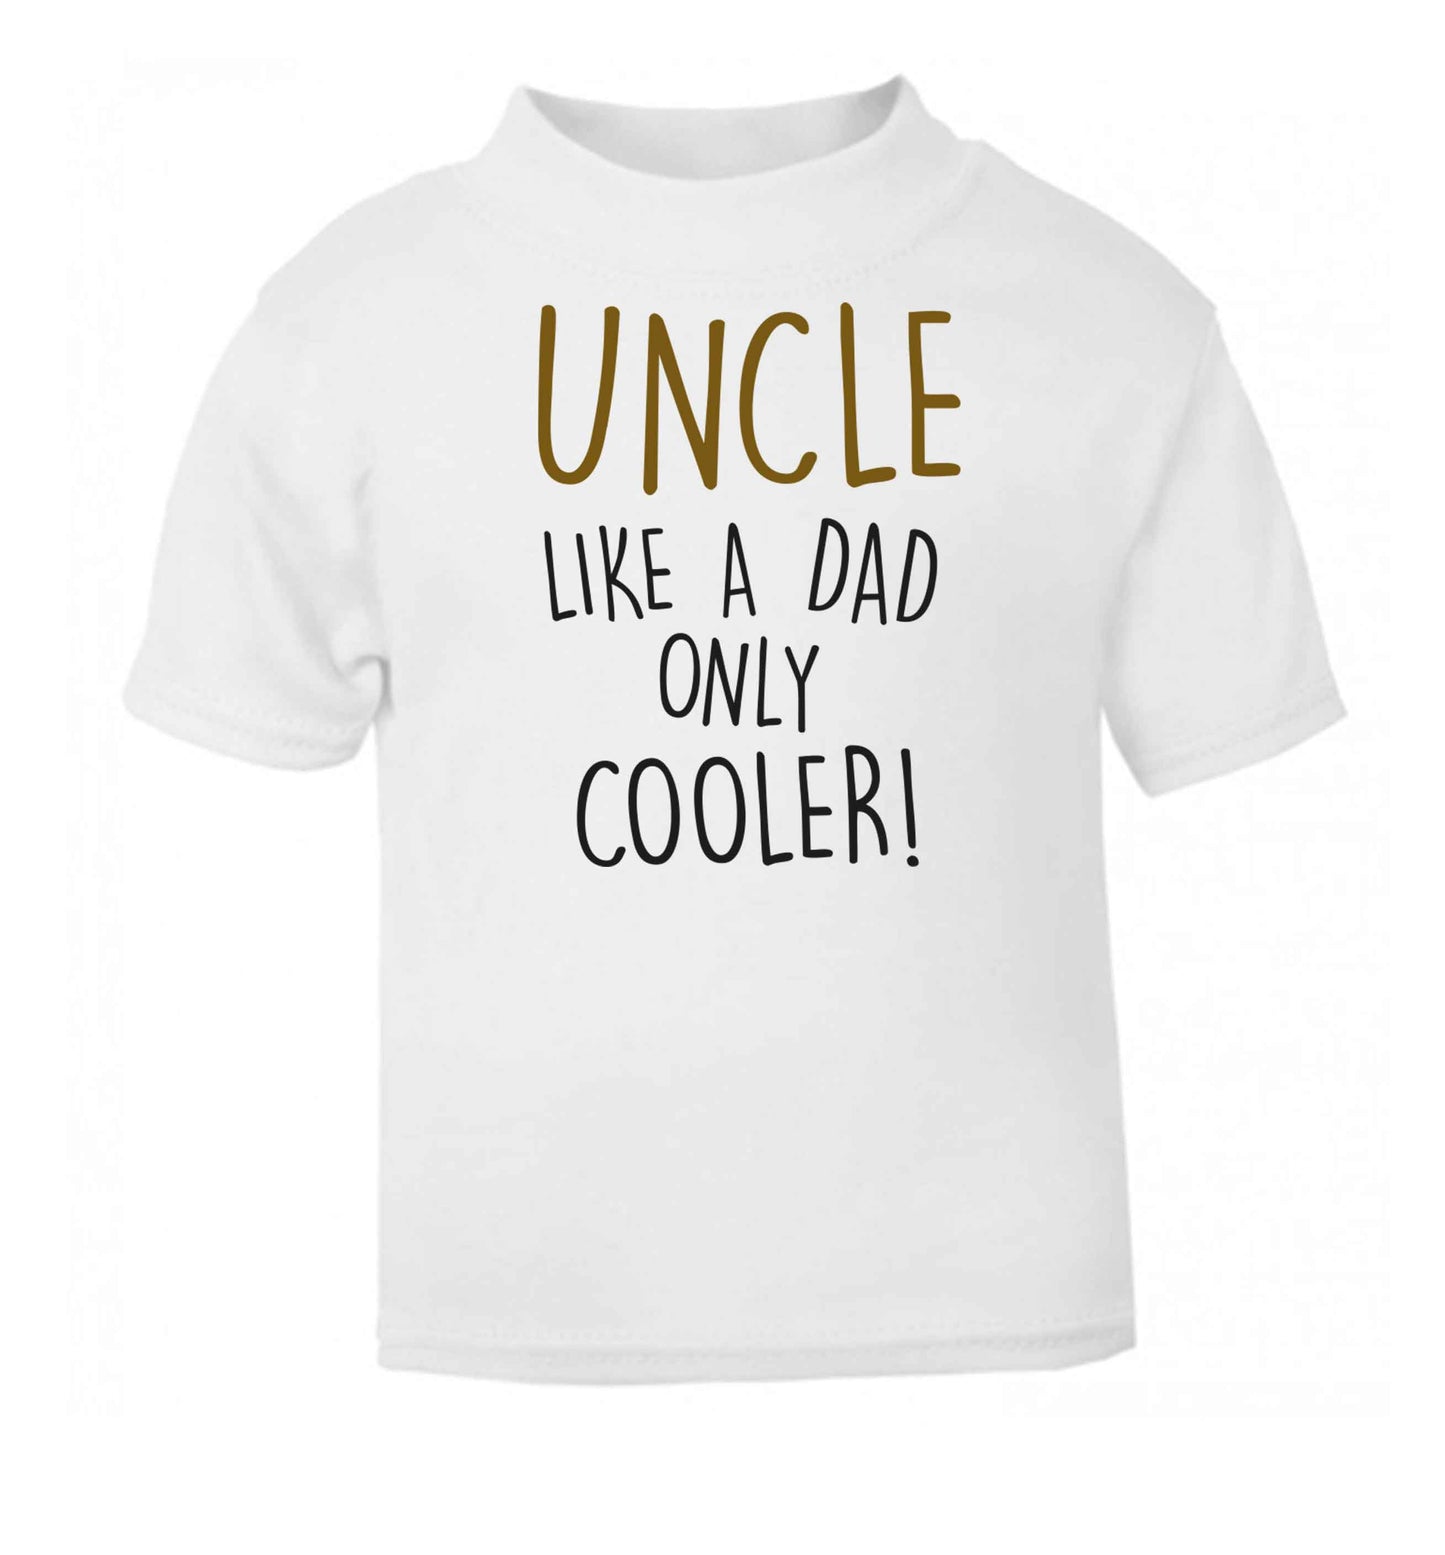 Uncle like a dad only cooler white baby toddler Tshirt 2 Years